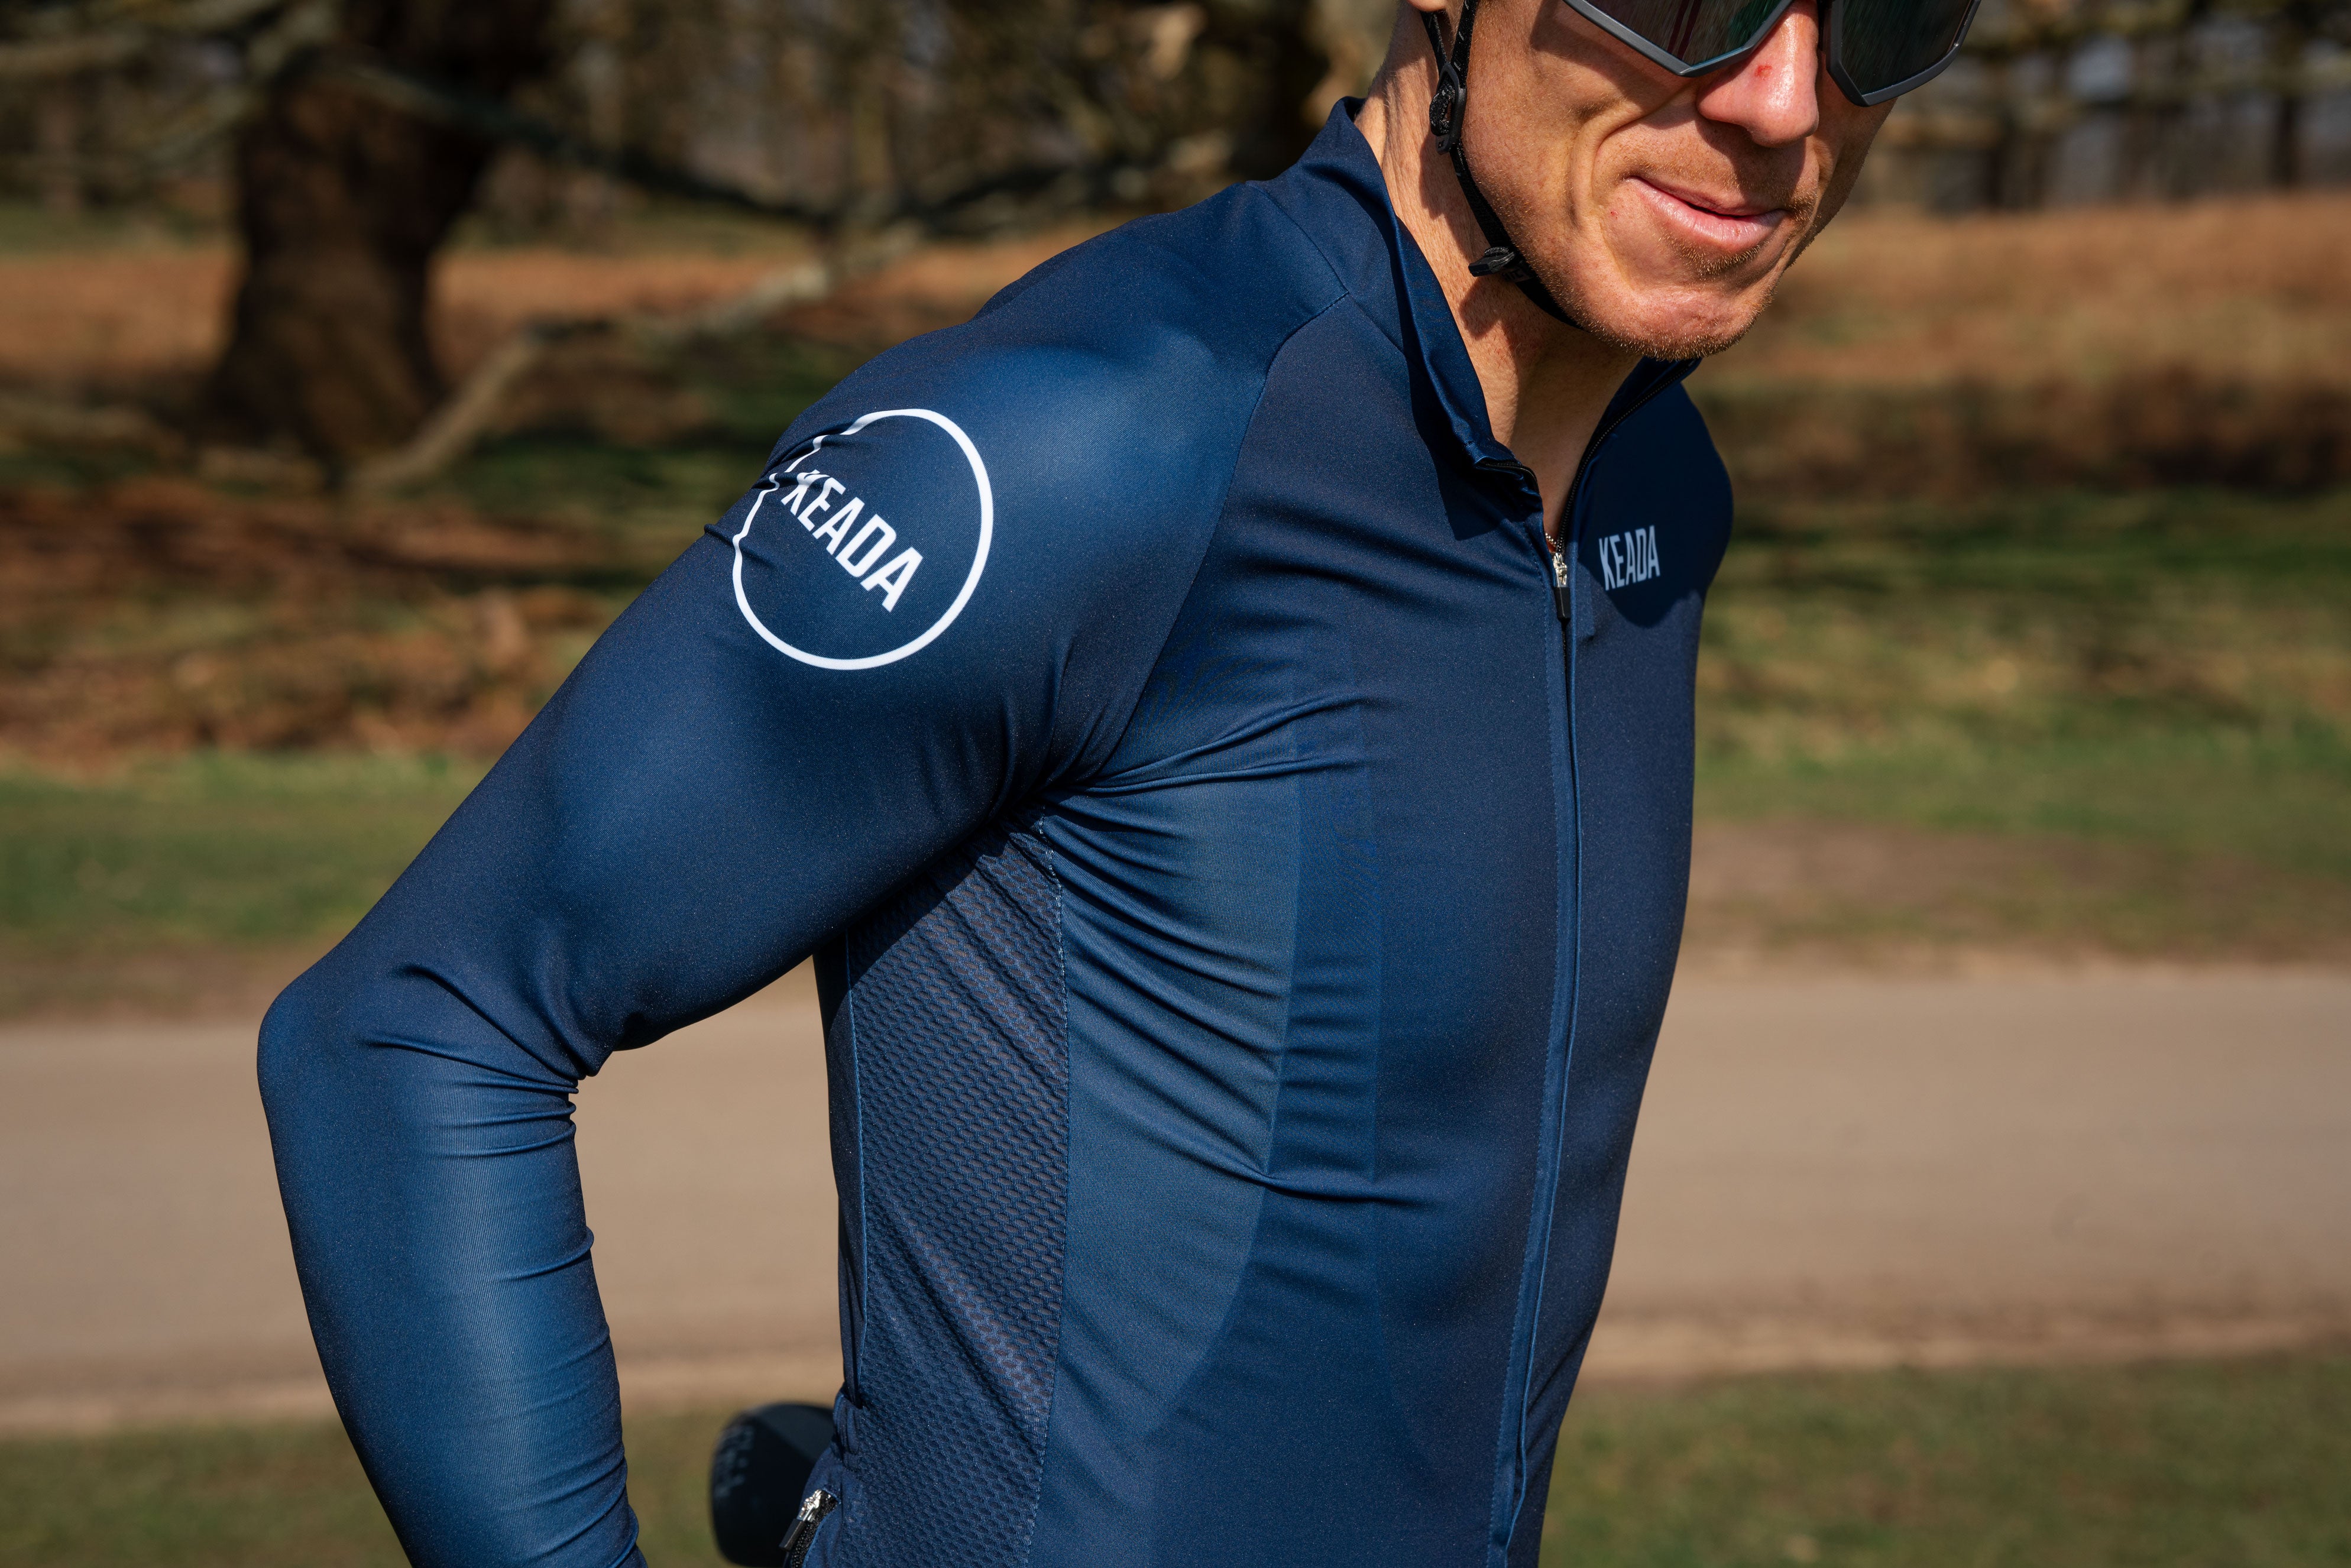 Men's Essential Long Sleeved Cycling Jersey - Navy